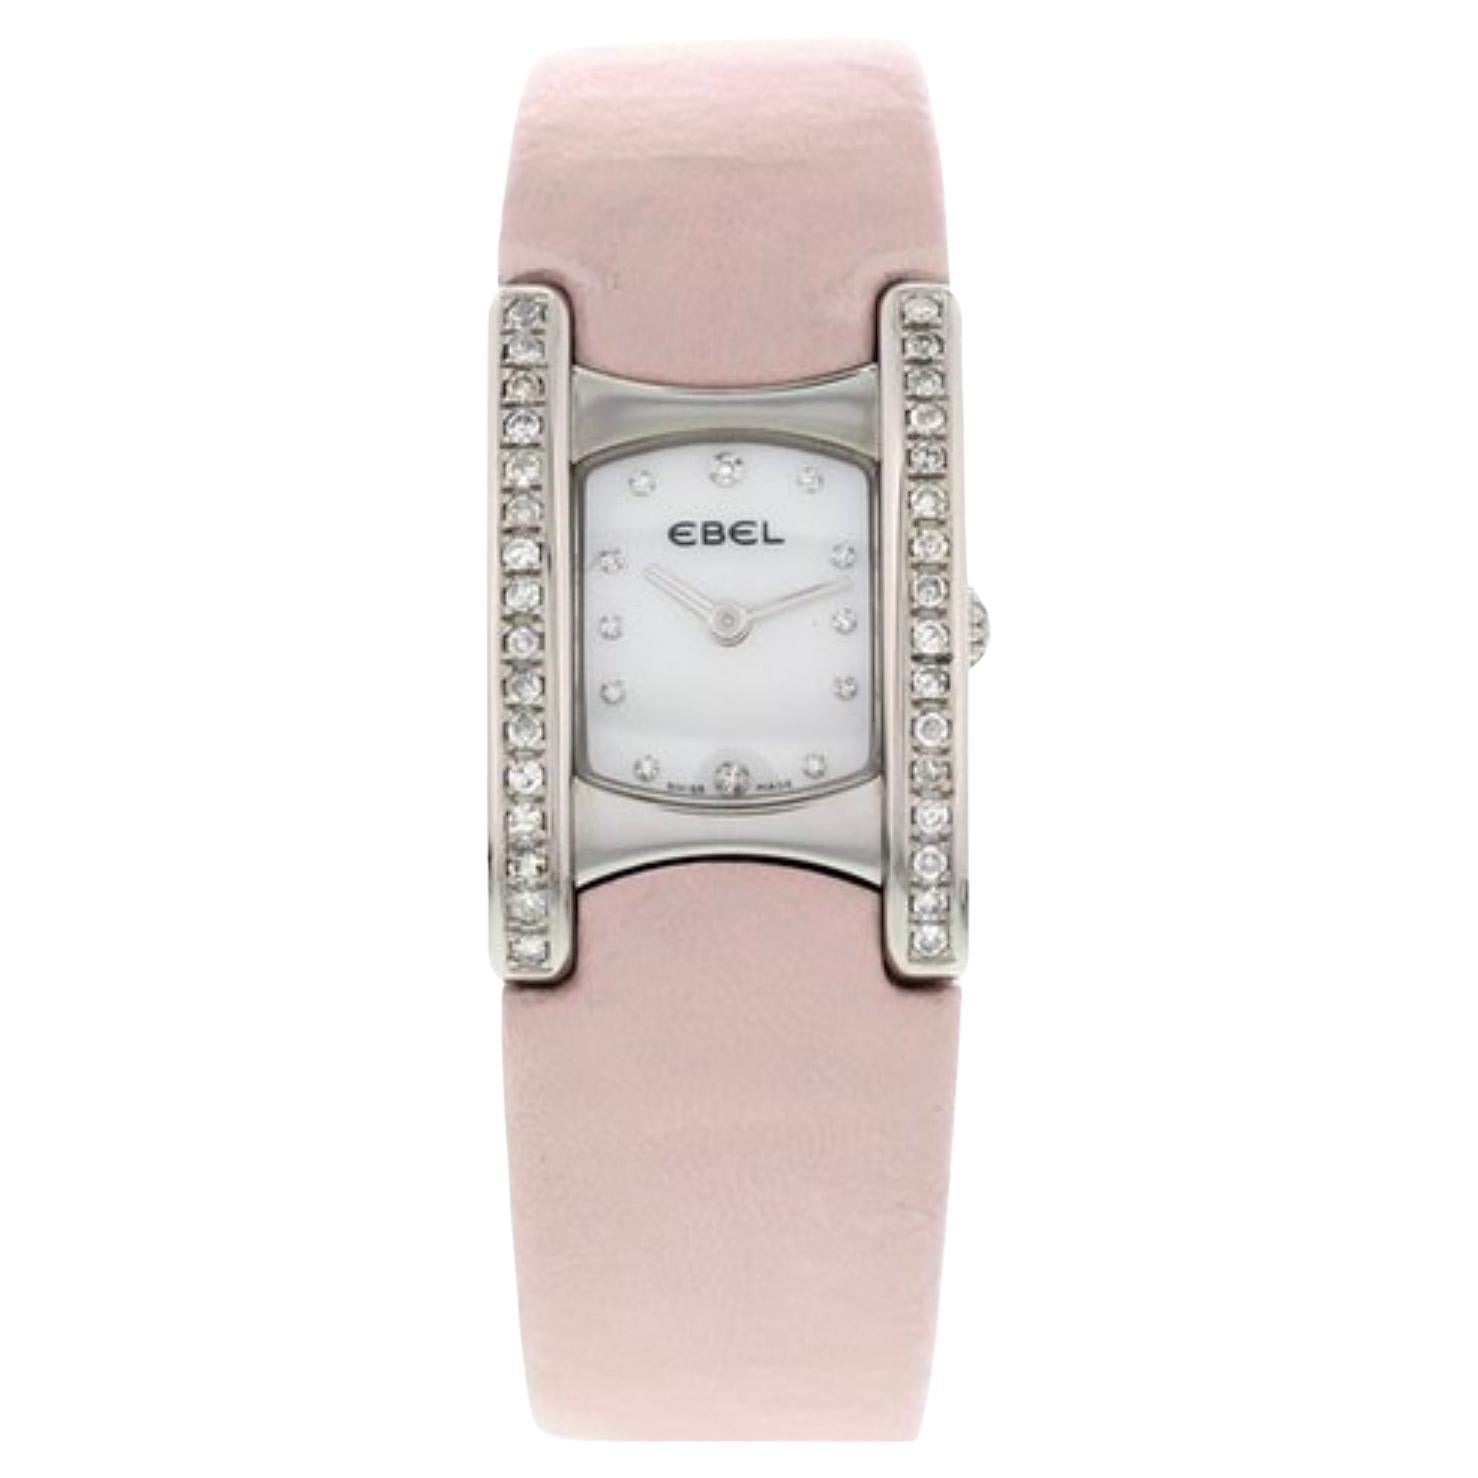 Ladies Ebel Beluga Stainless Steel with Diamonds E9057a28-10, Leather Pink Belt